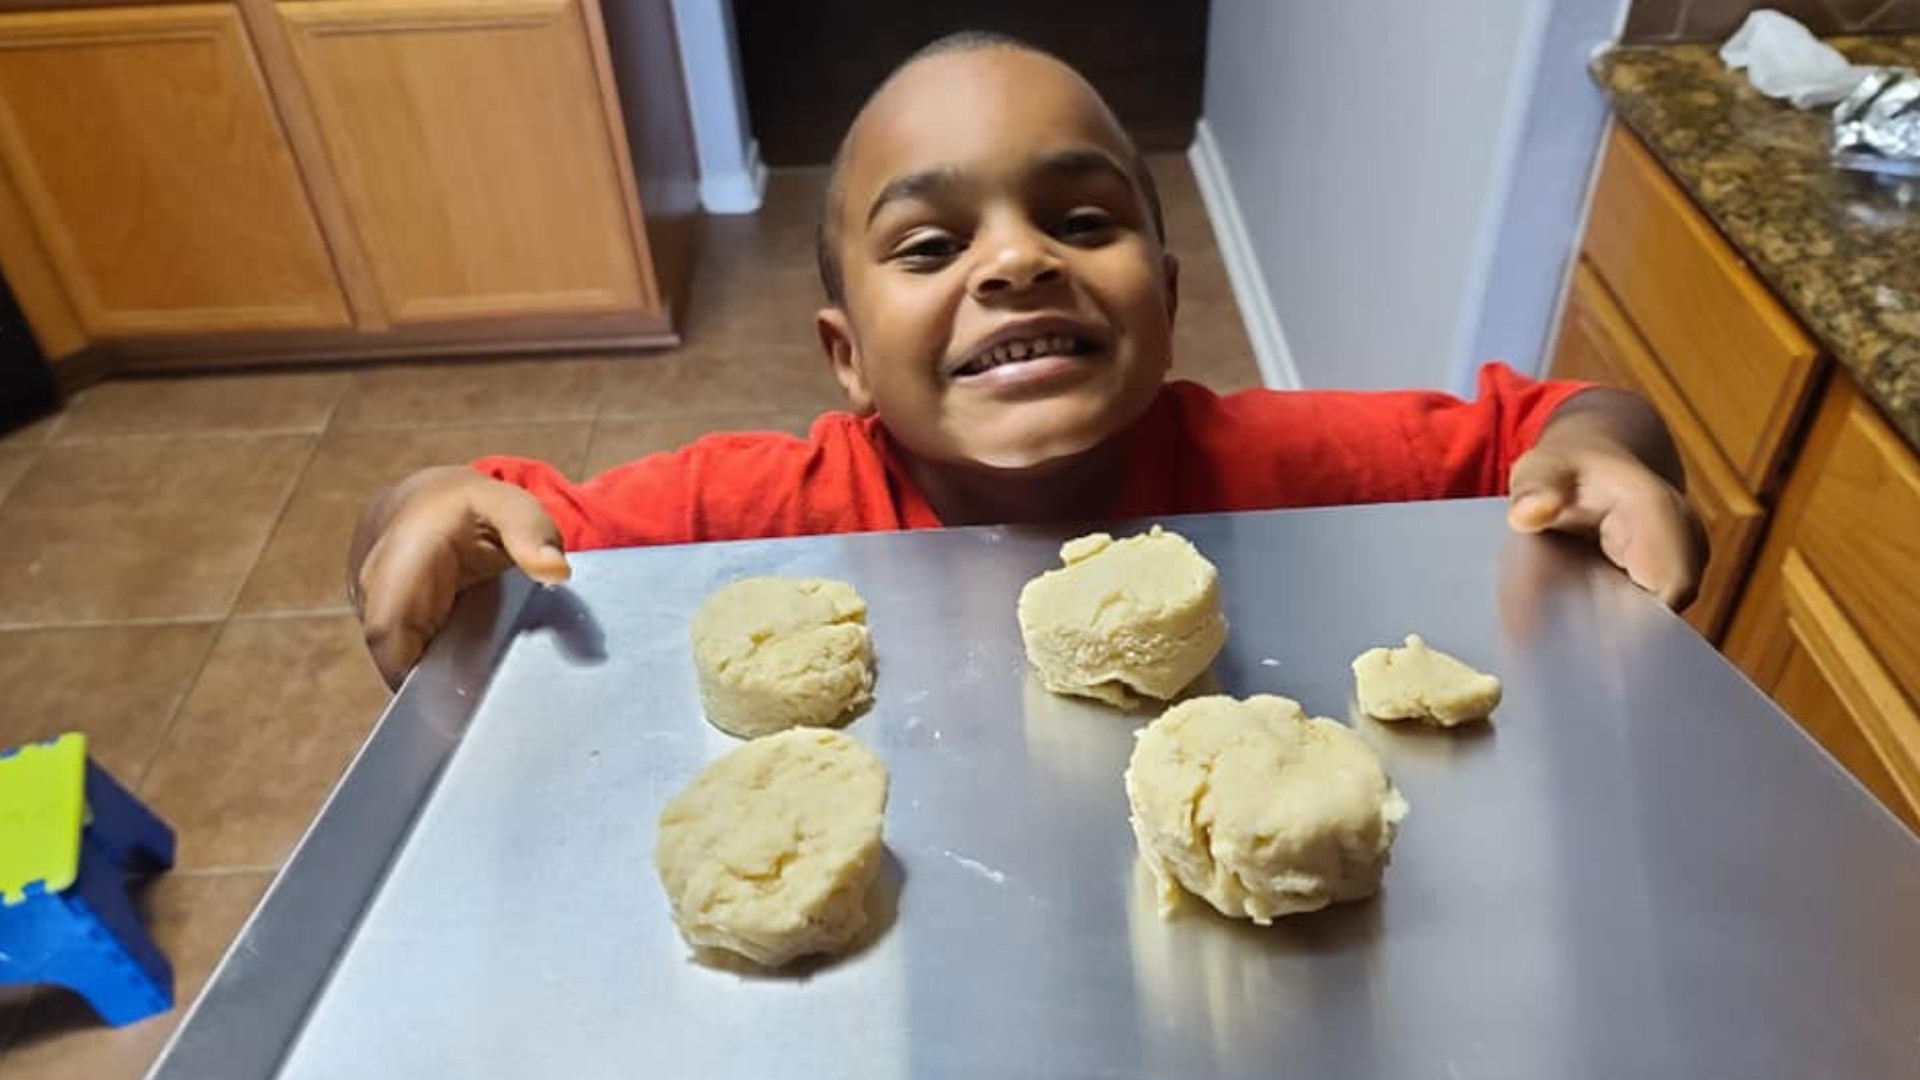 Professional chef Phillip Alexander and his 7-year-old son are gaining hundreds of viewers less than a month after starting Cooking with the Phils on Facebook.